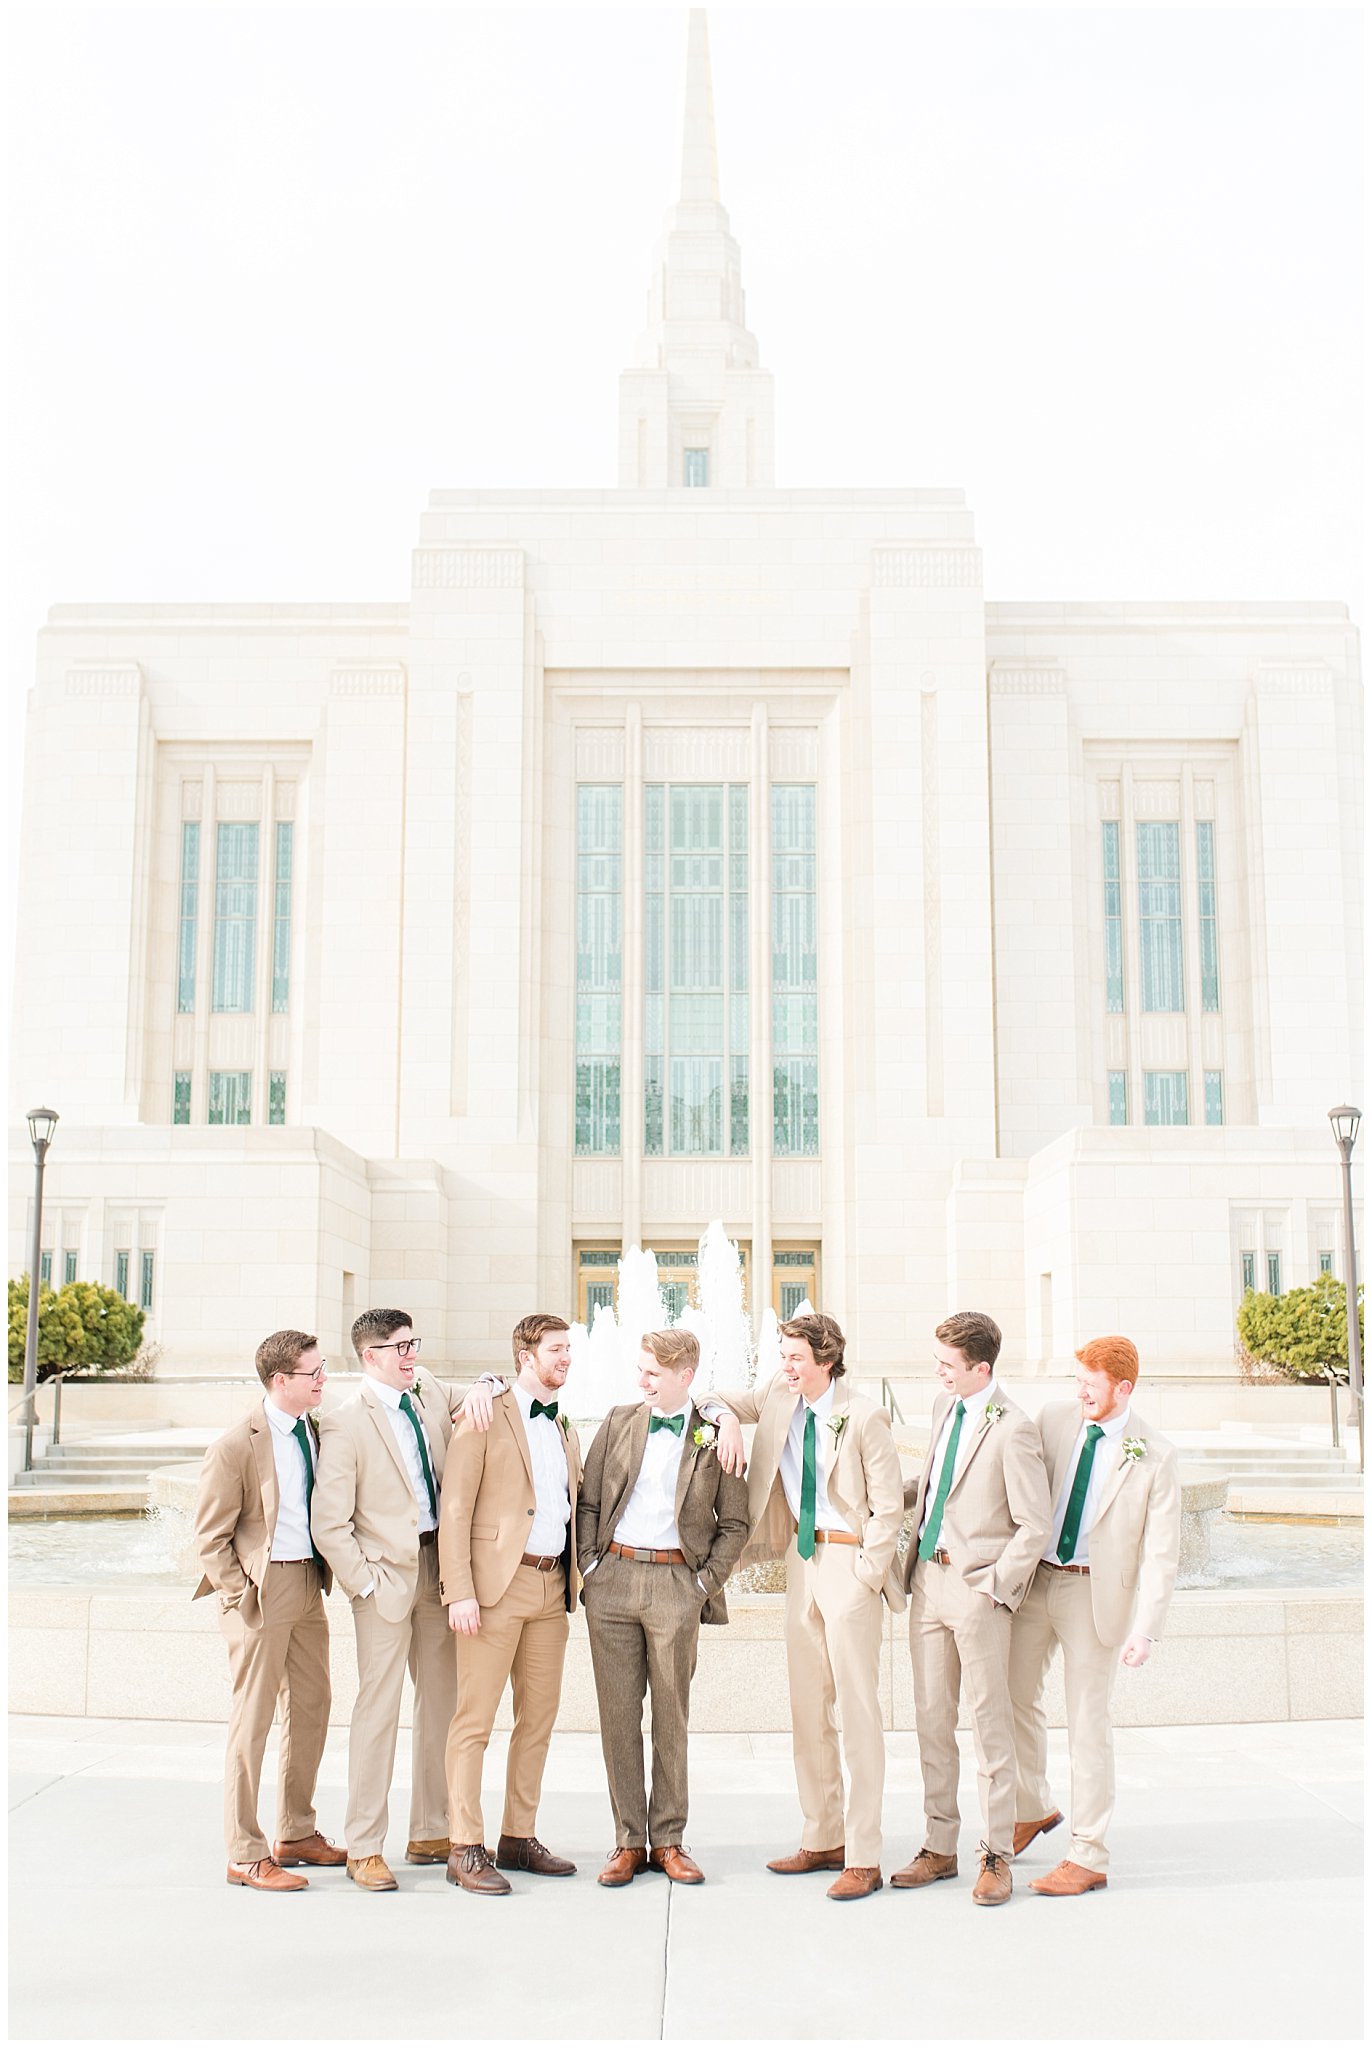 Groomsmen in tan and brown suits with emerald green ties during Ogden Temple winter wedding | Brown, Emerald Green, and white wedding | Ogden Temple and Sweet Magnolia Wedding | Jessie and Dallin Photography